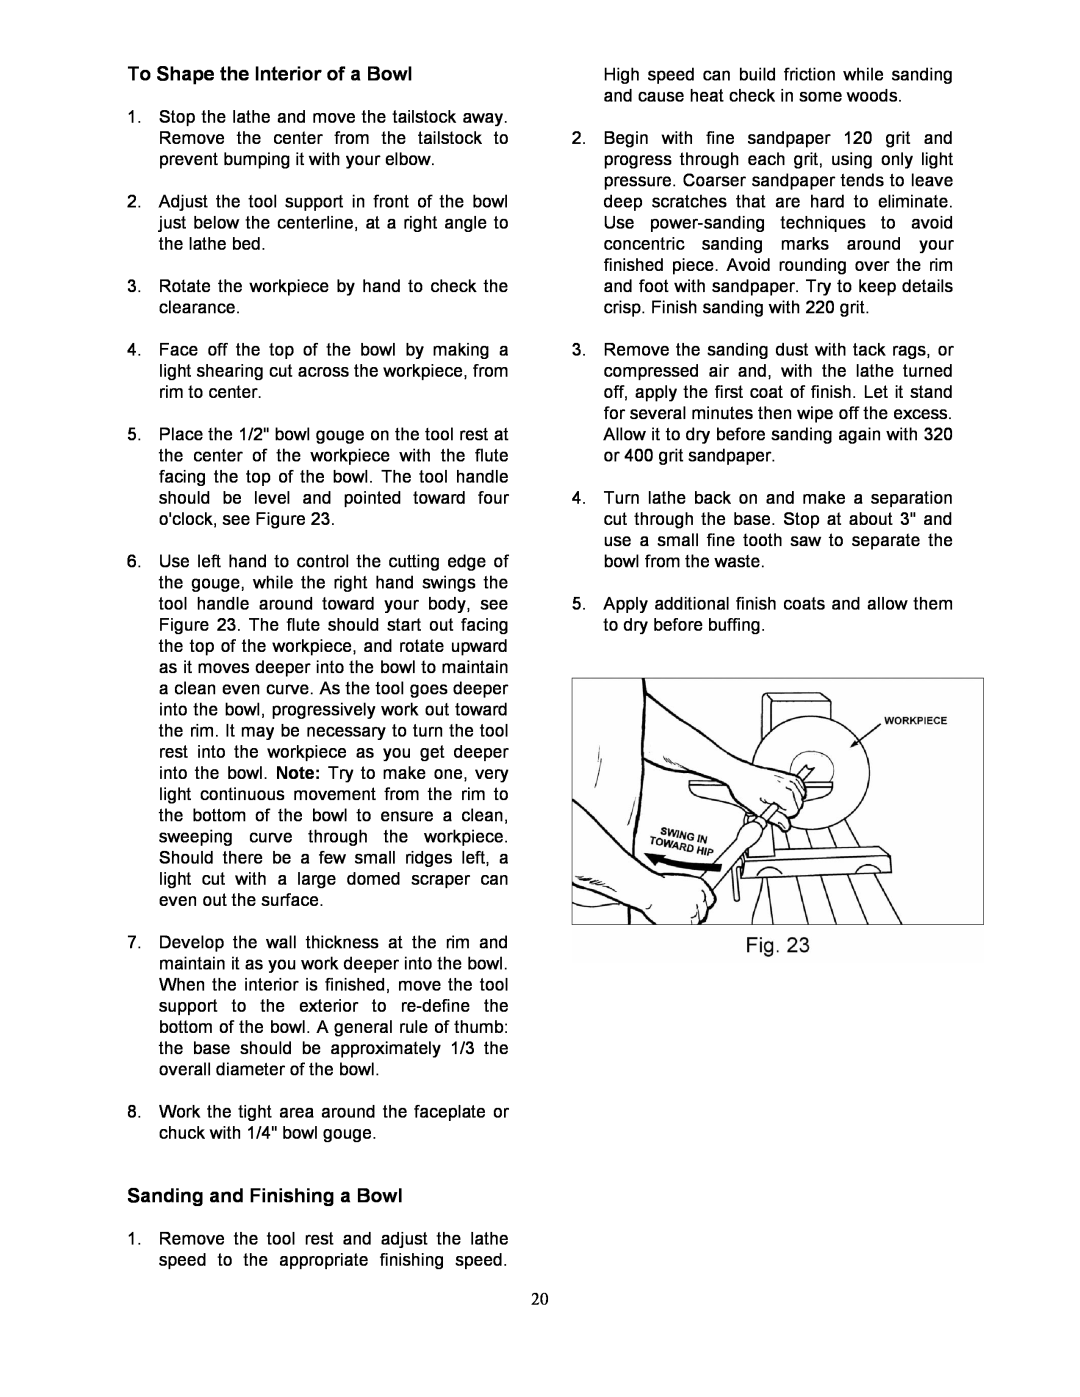 Jet Tools JWL-1642EVS-2 operating instructions To Shape the Interior of a Bowl, Sanding and Finishing a Bowl 